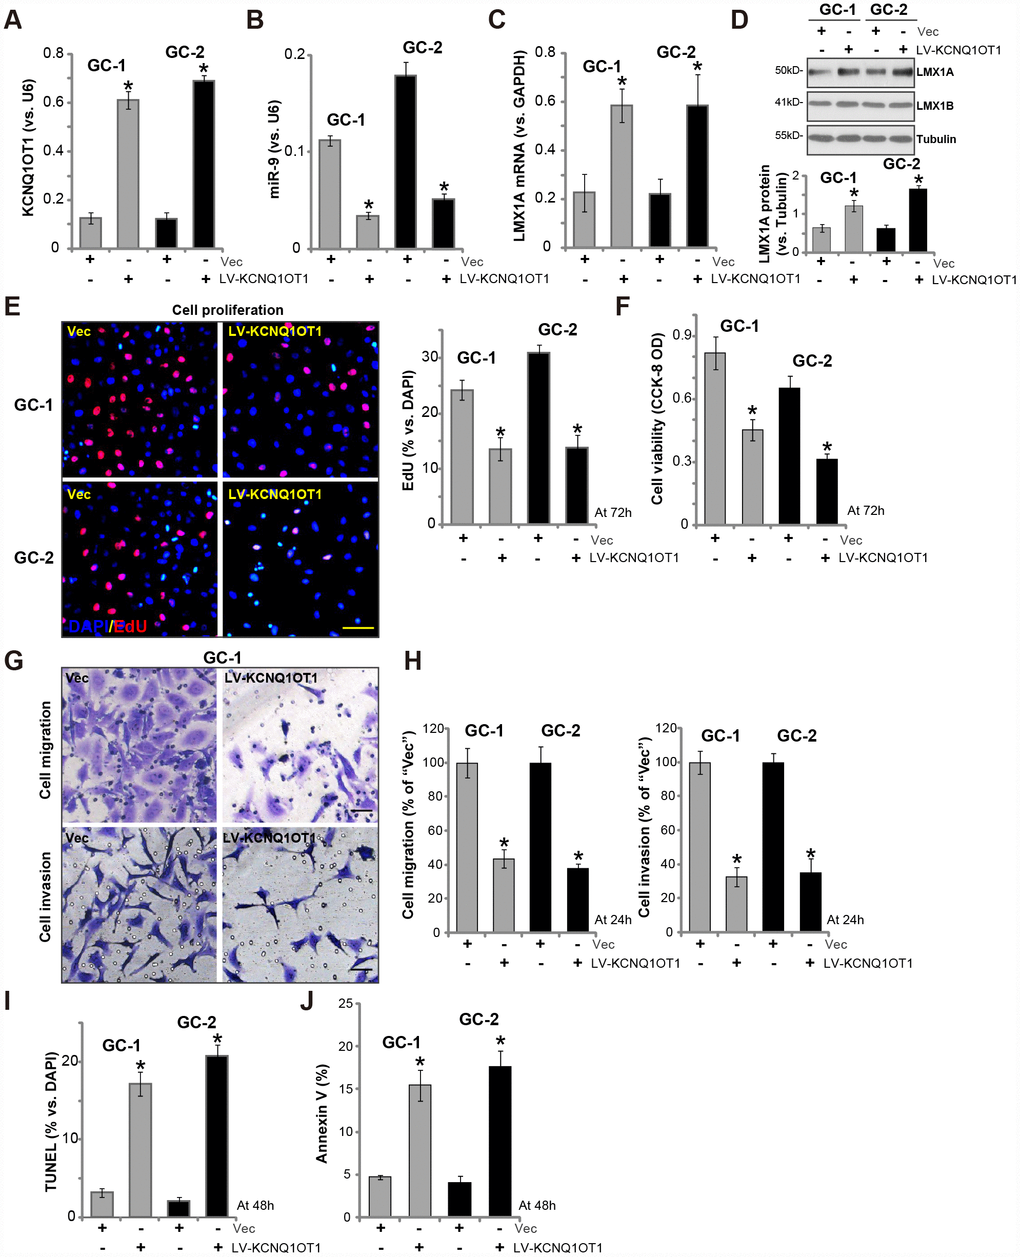 Forced overexpression of LncRNAKCNQ1OT1 induces miR-9 reduction and LMX1A upregulation in primary human GC cells. The primary human GC cells (“GC-1/GC-2”) were infected with LncRNAKCNQ1OT1-expressing lentivirus (“LV-KCNQ1OT1”) or scramble control vector lentivirus (“Vec”) for 72h, expression of KCNQ1OT1 (A), miR-9 (B) and LMX1A mRNA (C) were tested by qPCR assay; LMX1A and LMX1B protein expression in total cell lysates was tested by Western blotting assay (D, LMX1A protein results were quantified); Cells were further cultured for the indicated time periods, cell proliferation and viability were tested by EdU staining assay (E) and CCK-8 (F), respectively, with cell migration and invasion tested by “Transwell” and “Matrigel Transwell” assay (G and H); Cell apoptosis was quantified via the TUNEL staining assay (I) and Annexin V-FACS assay (J). For each assay, n=5. *P vs. “Vec” cells. Experiments in this figure were repeated three times, and similar results were obtained. Bar=100 μm (E and G).